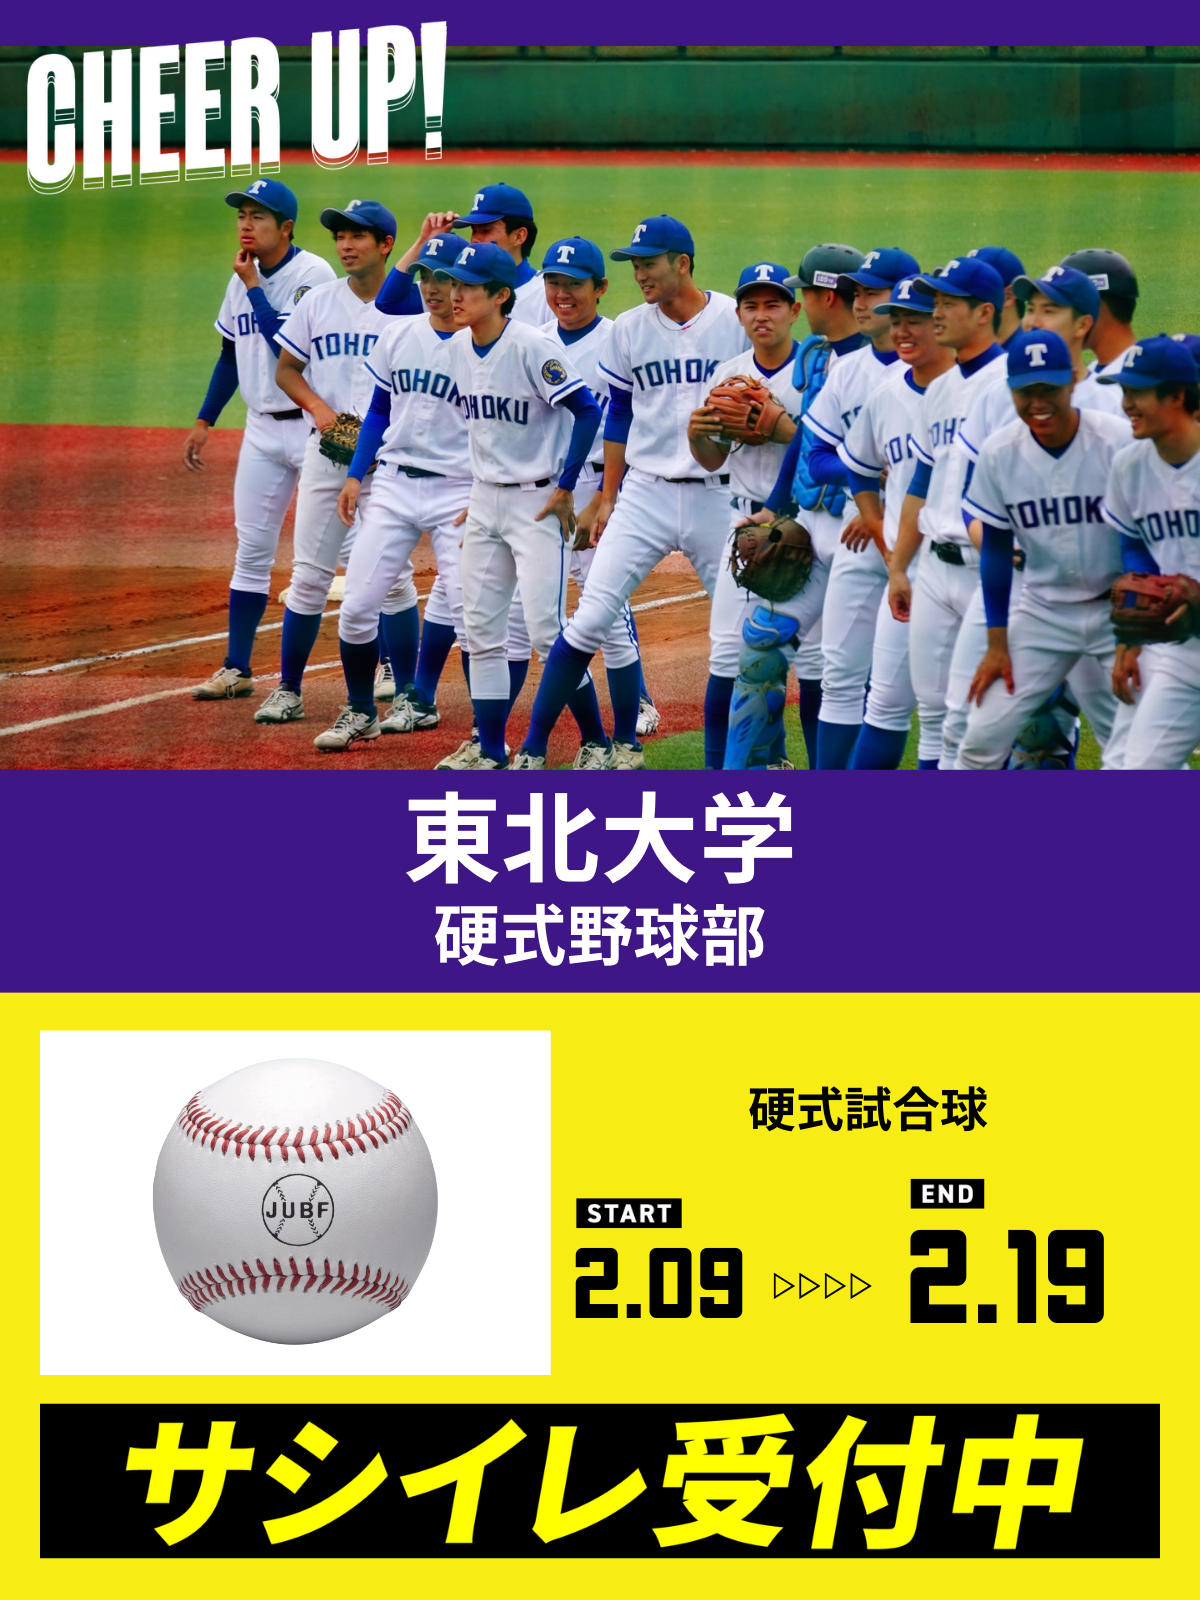 CHEER UP! for 東北大学　硬式野球部